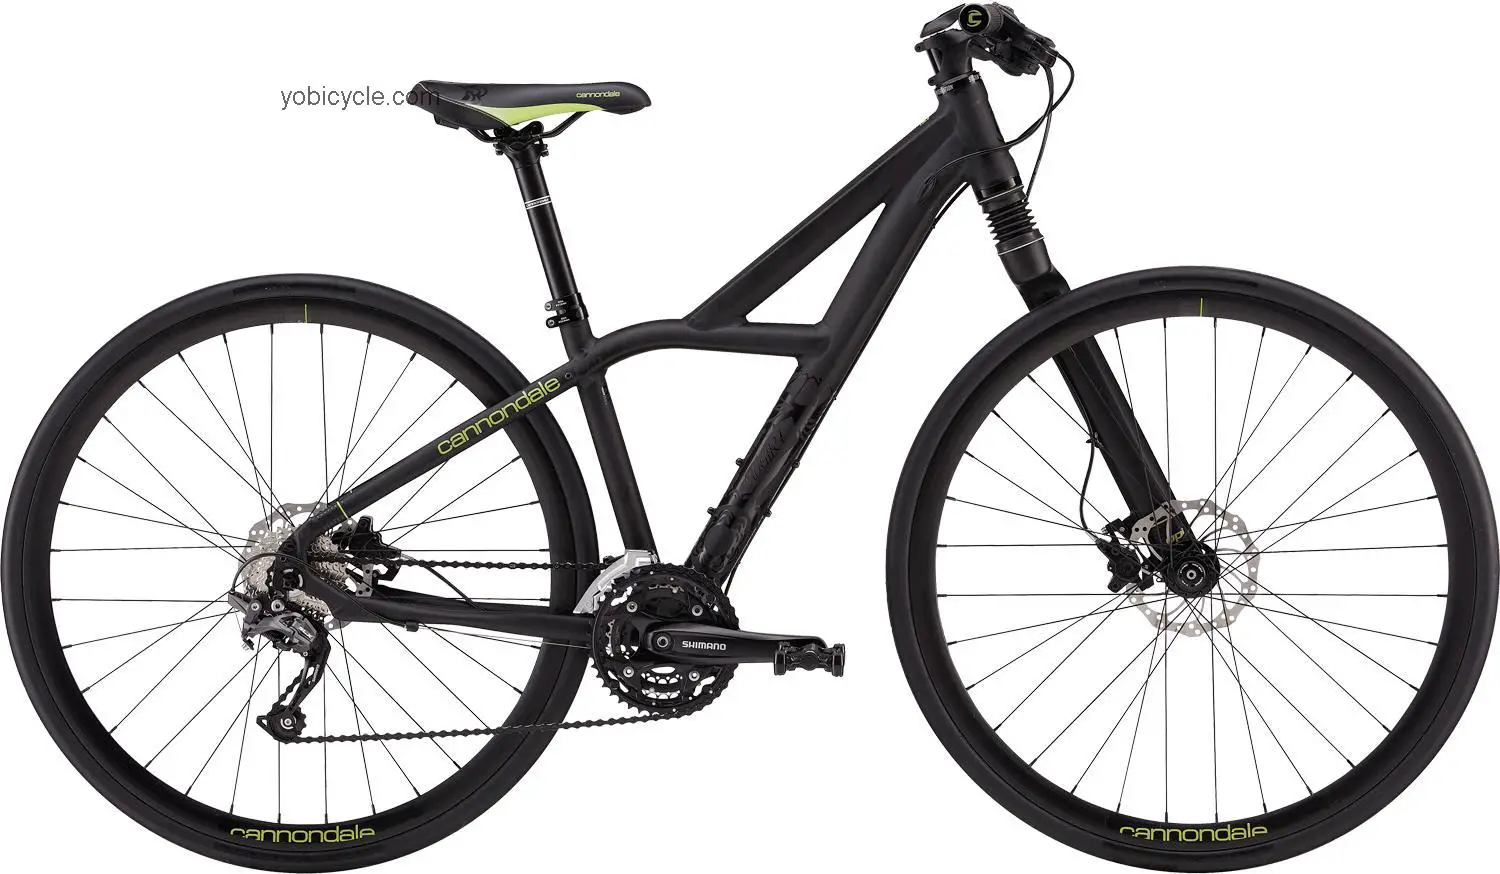 Cannondale Badgirl 1 2013 comparison online with competitors